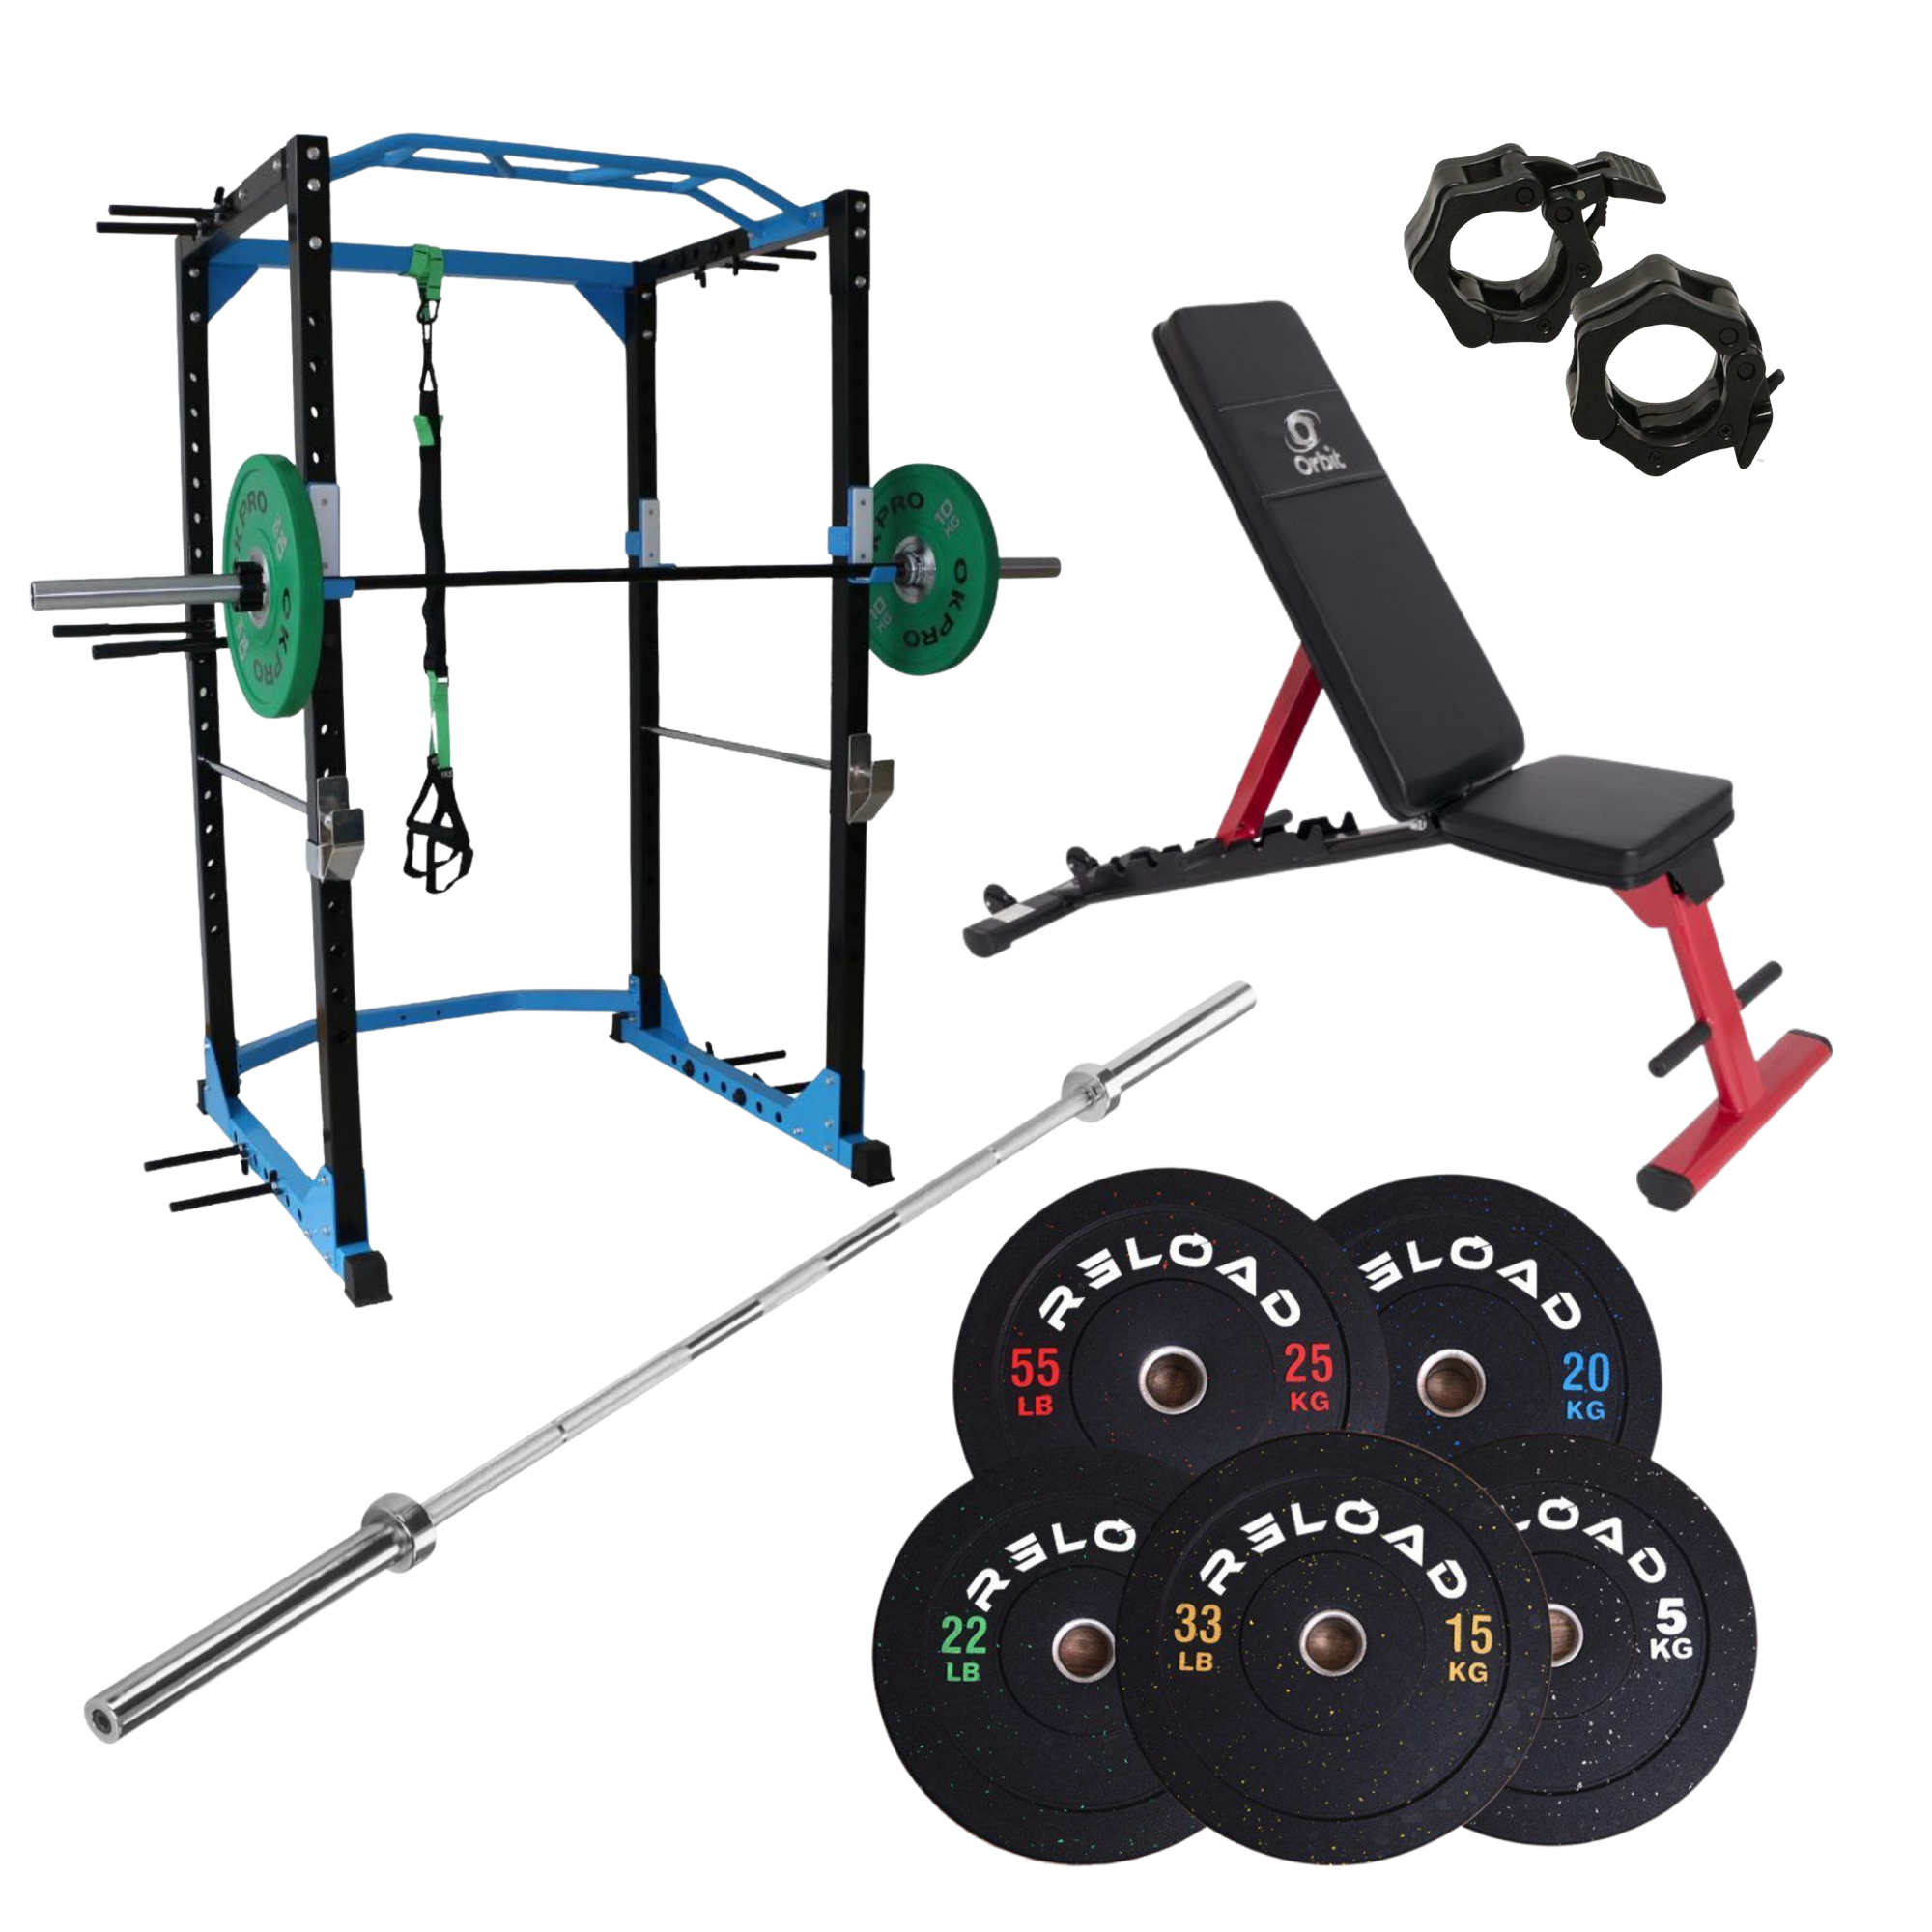 Commercial Power Cage & Bumper Plate Home Gym [Package 2] | Arrives May - Fitness Hero Brand new